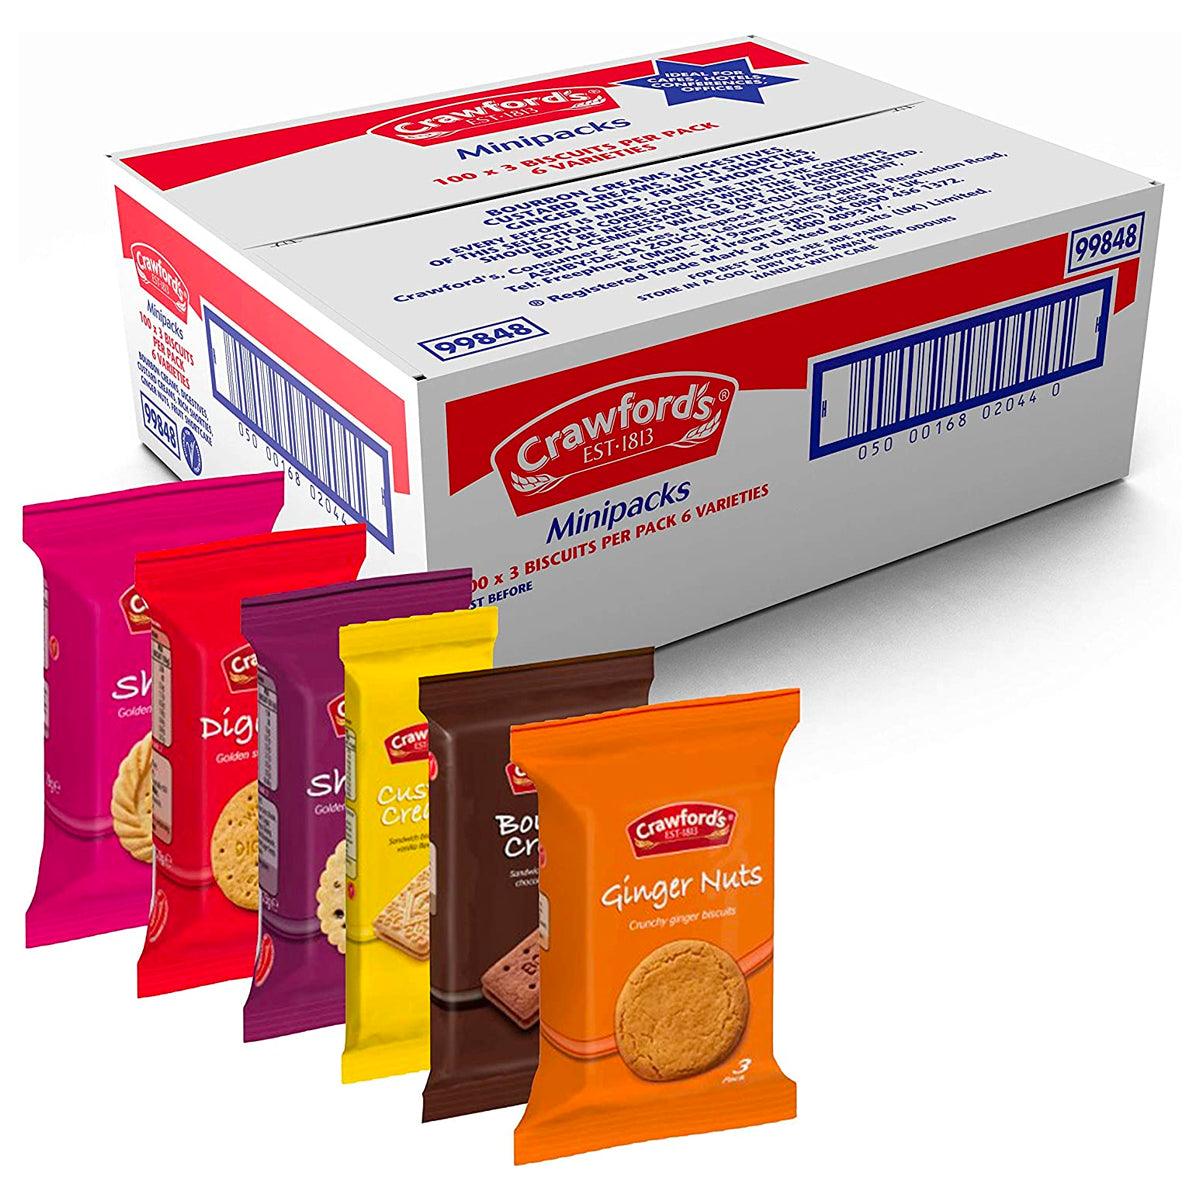 Crawfords Biscuit Portion Packs - Individually Wrapped - 100 Packs (3 Biscuits Each) - Vending Superstore